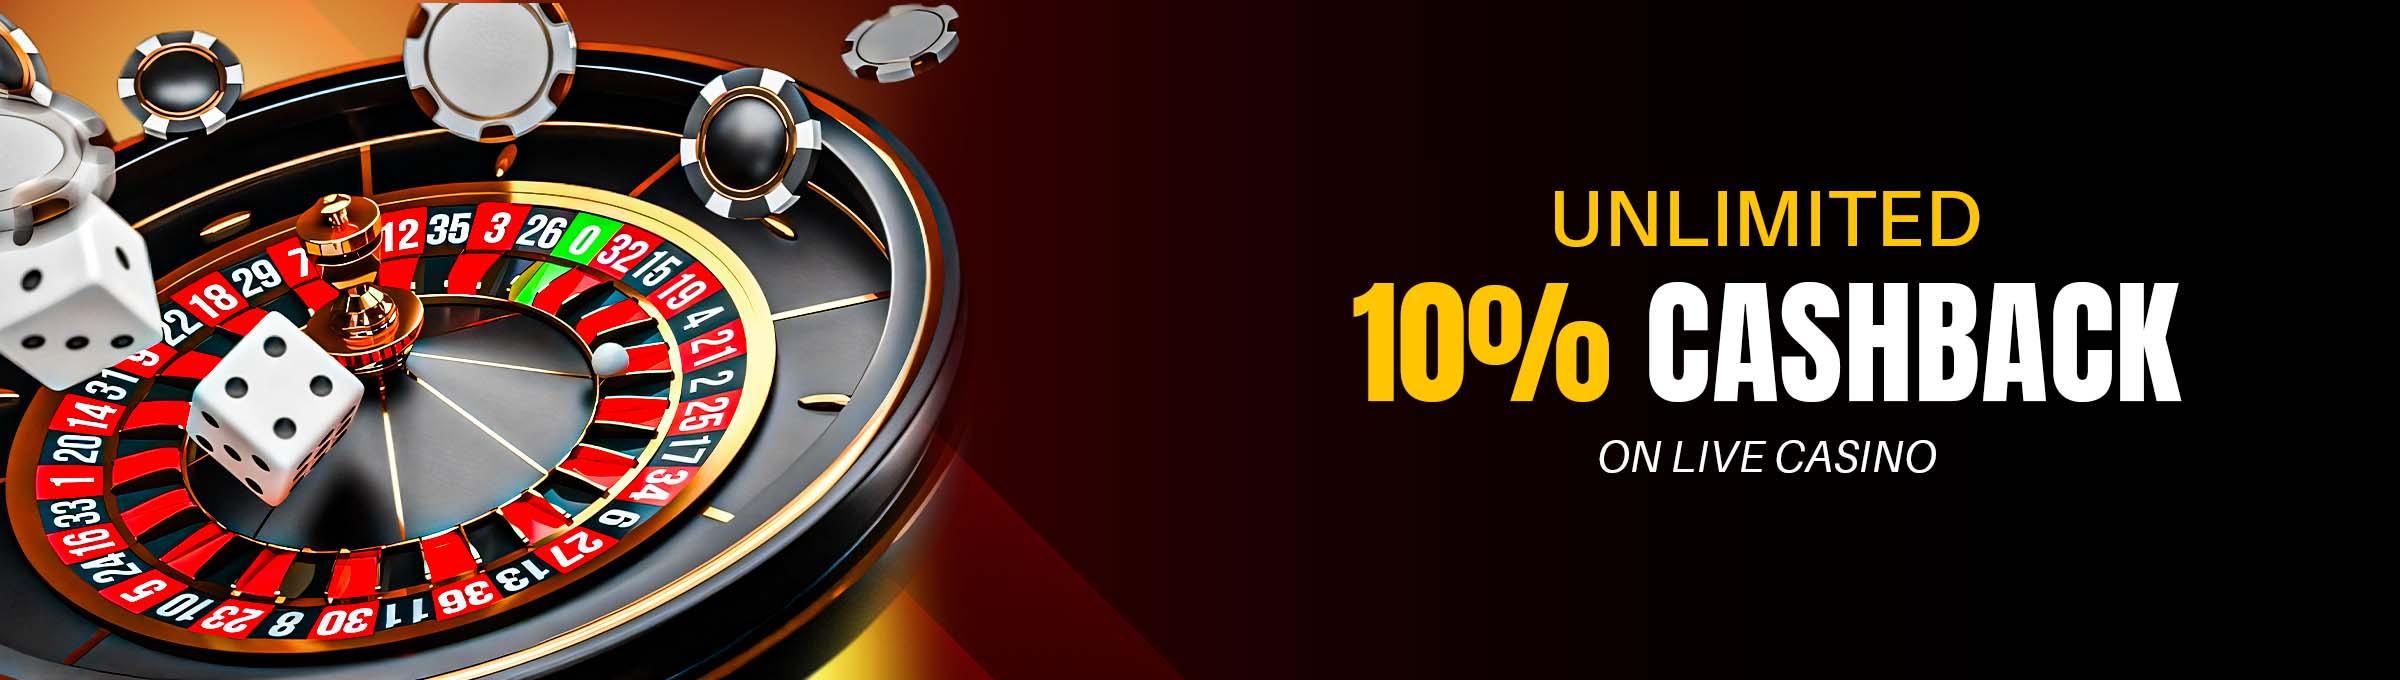 10% Weekly UNLIMITED Cashback on Live Casino 